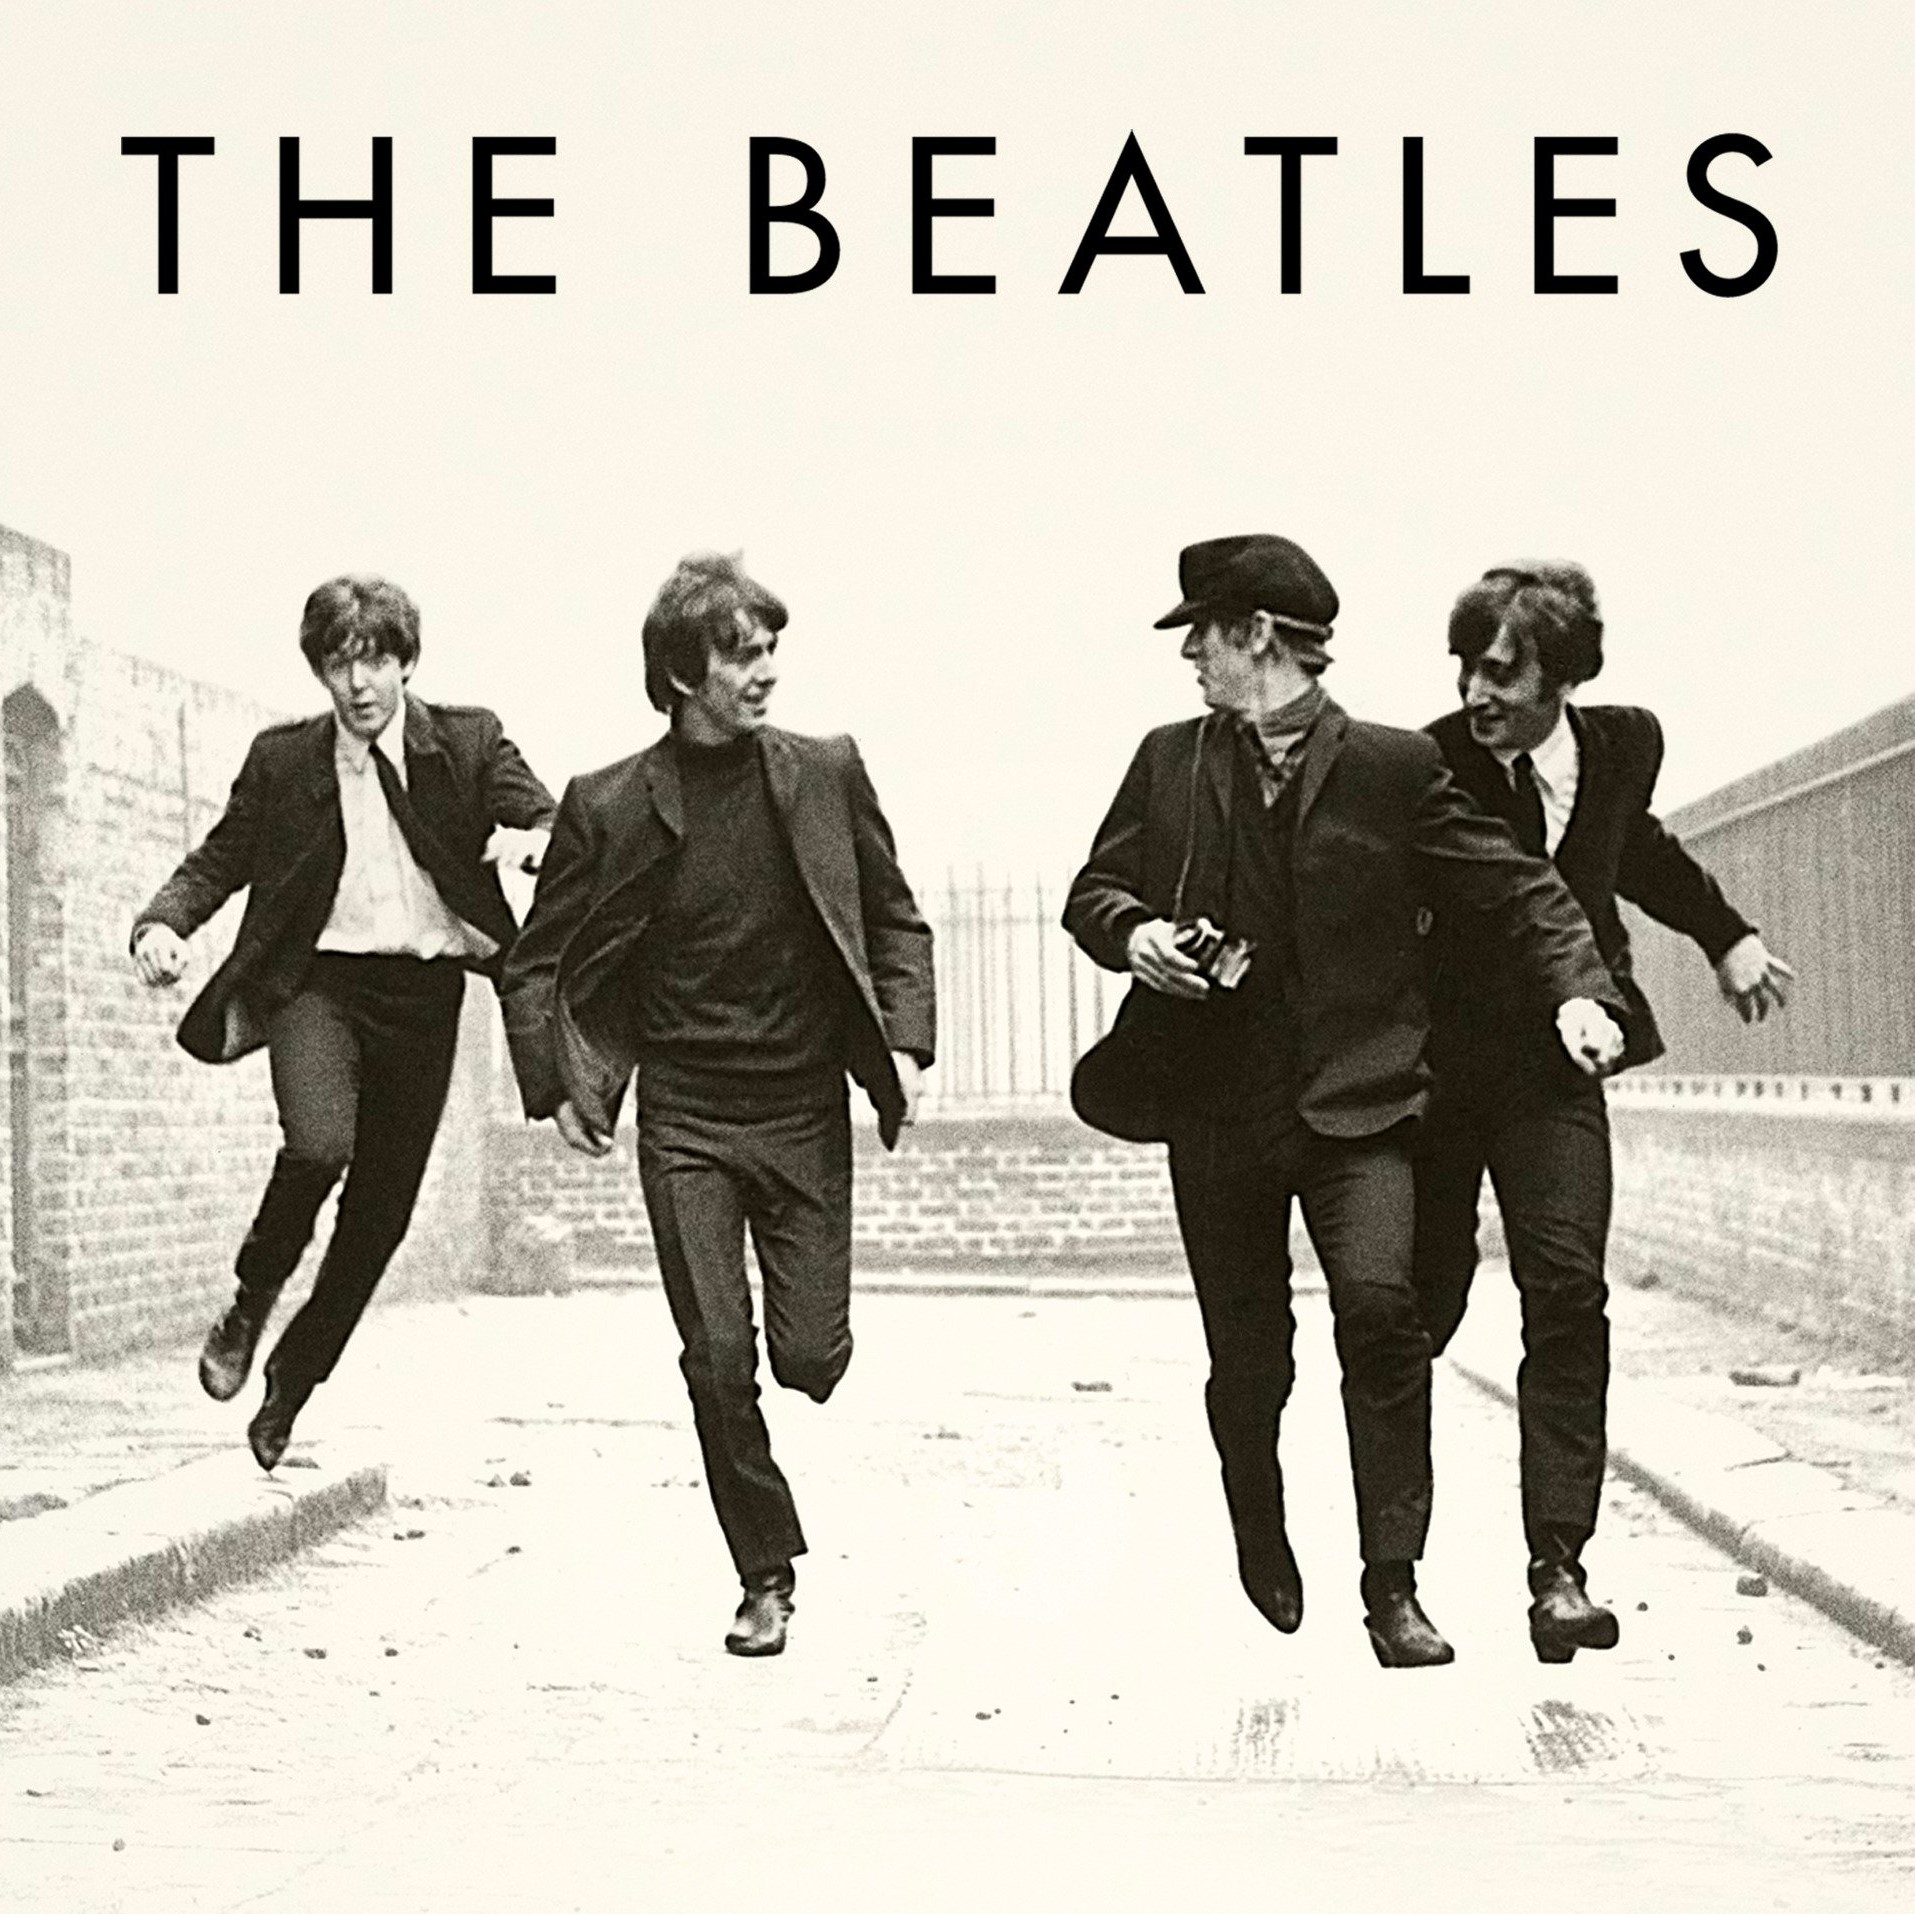 The beatles a hard day s night. The Beatles 1964. Постер Beatles. Битлз a hard Days Night. The Beatles a hard Day's Night 1964.